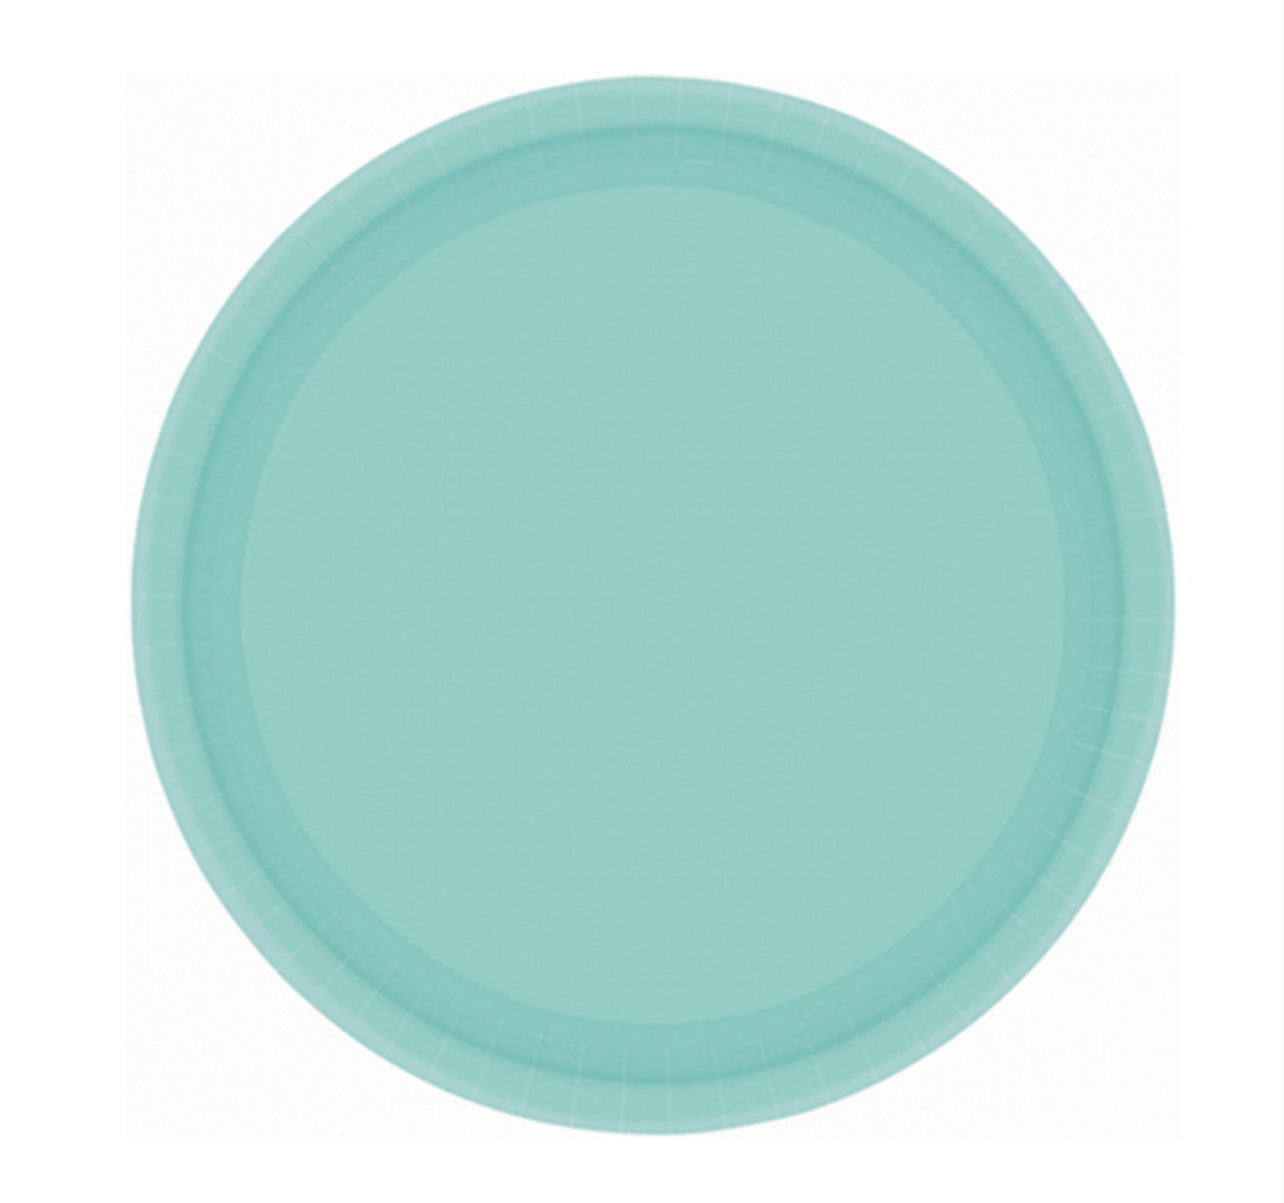 ROBINS EGG BLUE SMALL ROUND PAPER PLATES (PACK OF 20)